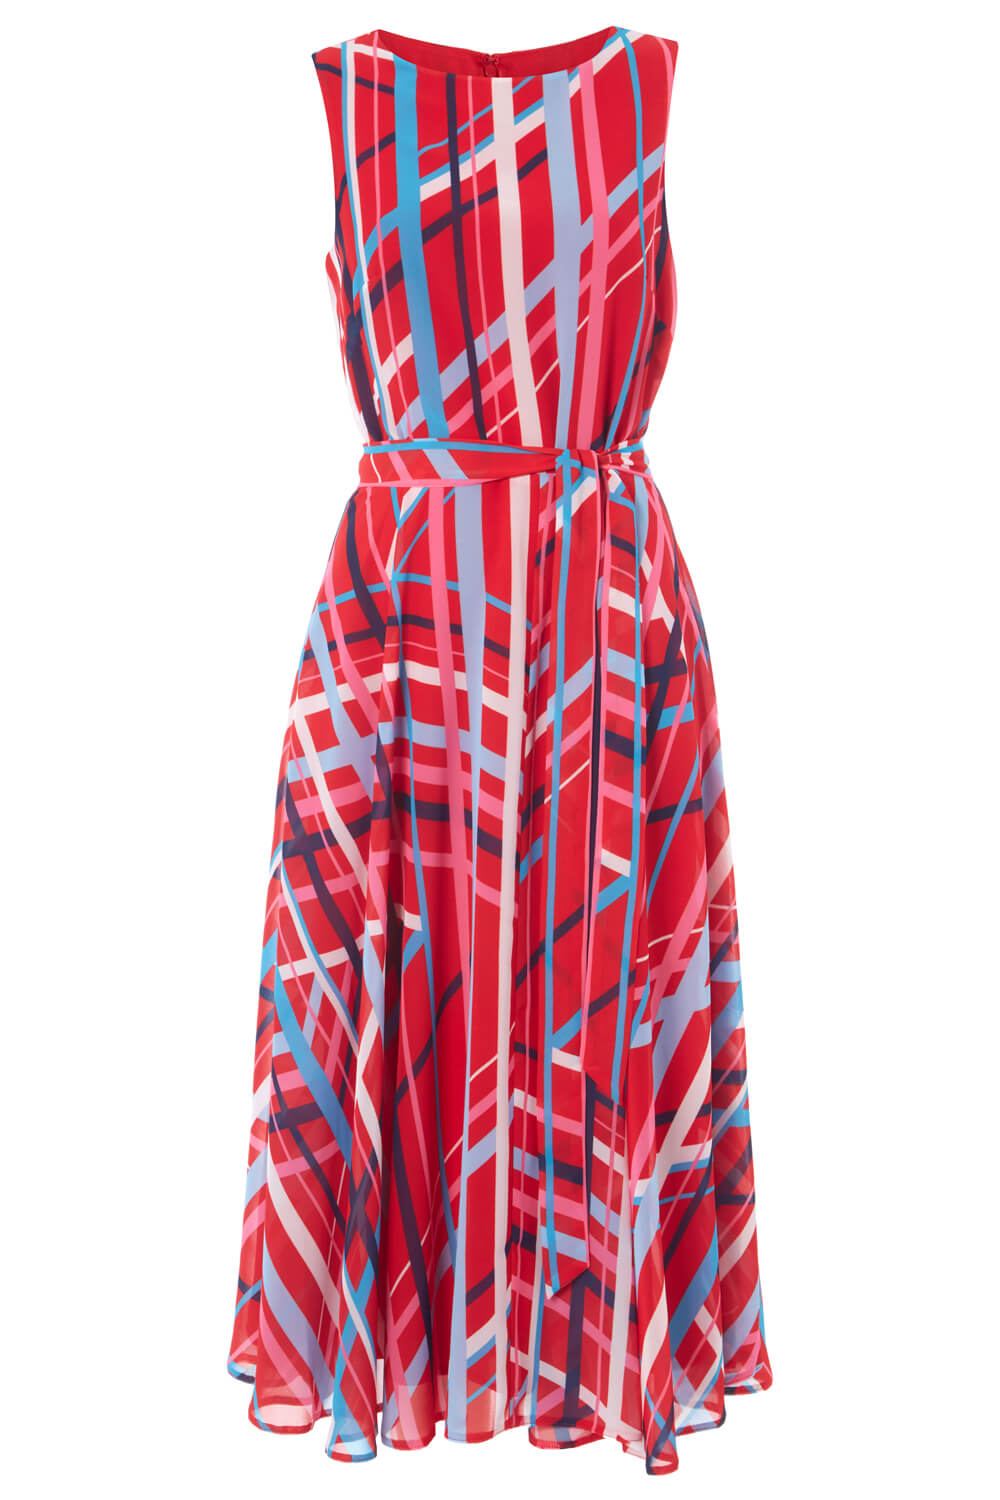 Red Stripe Print Fit and Flare Midi Dress, Image 5 of 5